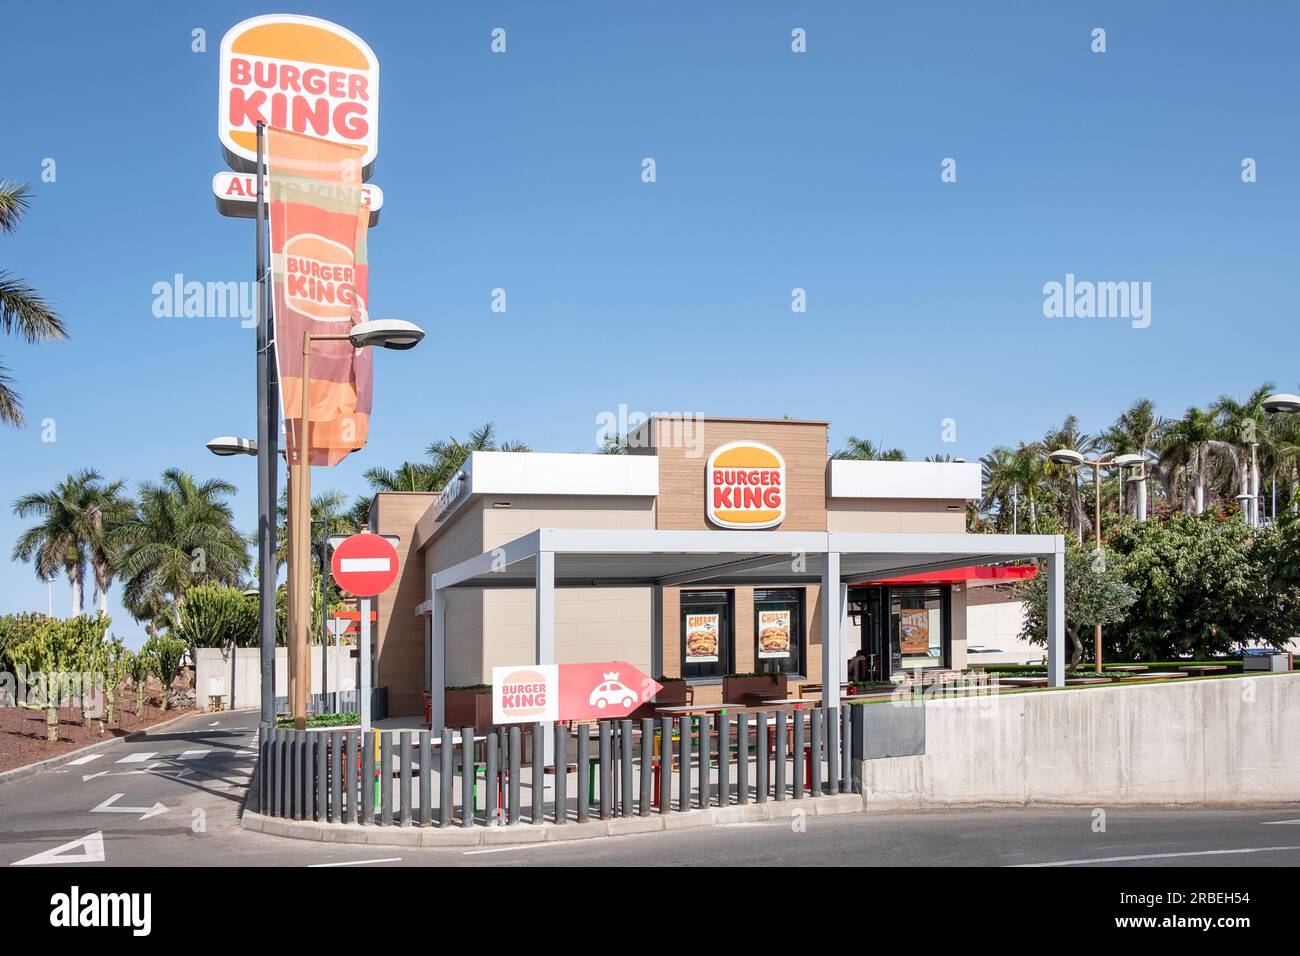 Fast food restaurant situated on the grounds of a popular shopping area with dine-in and drive-through facilities, Burger King, Siam Mall, Tenerife Stock Photo